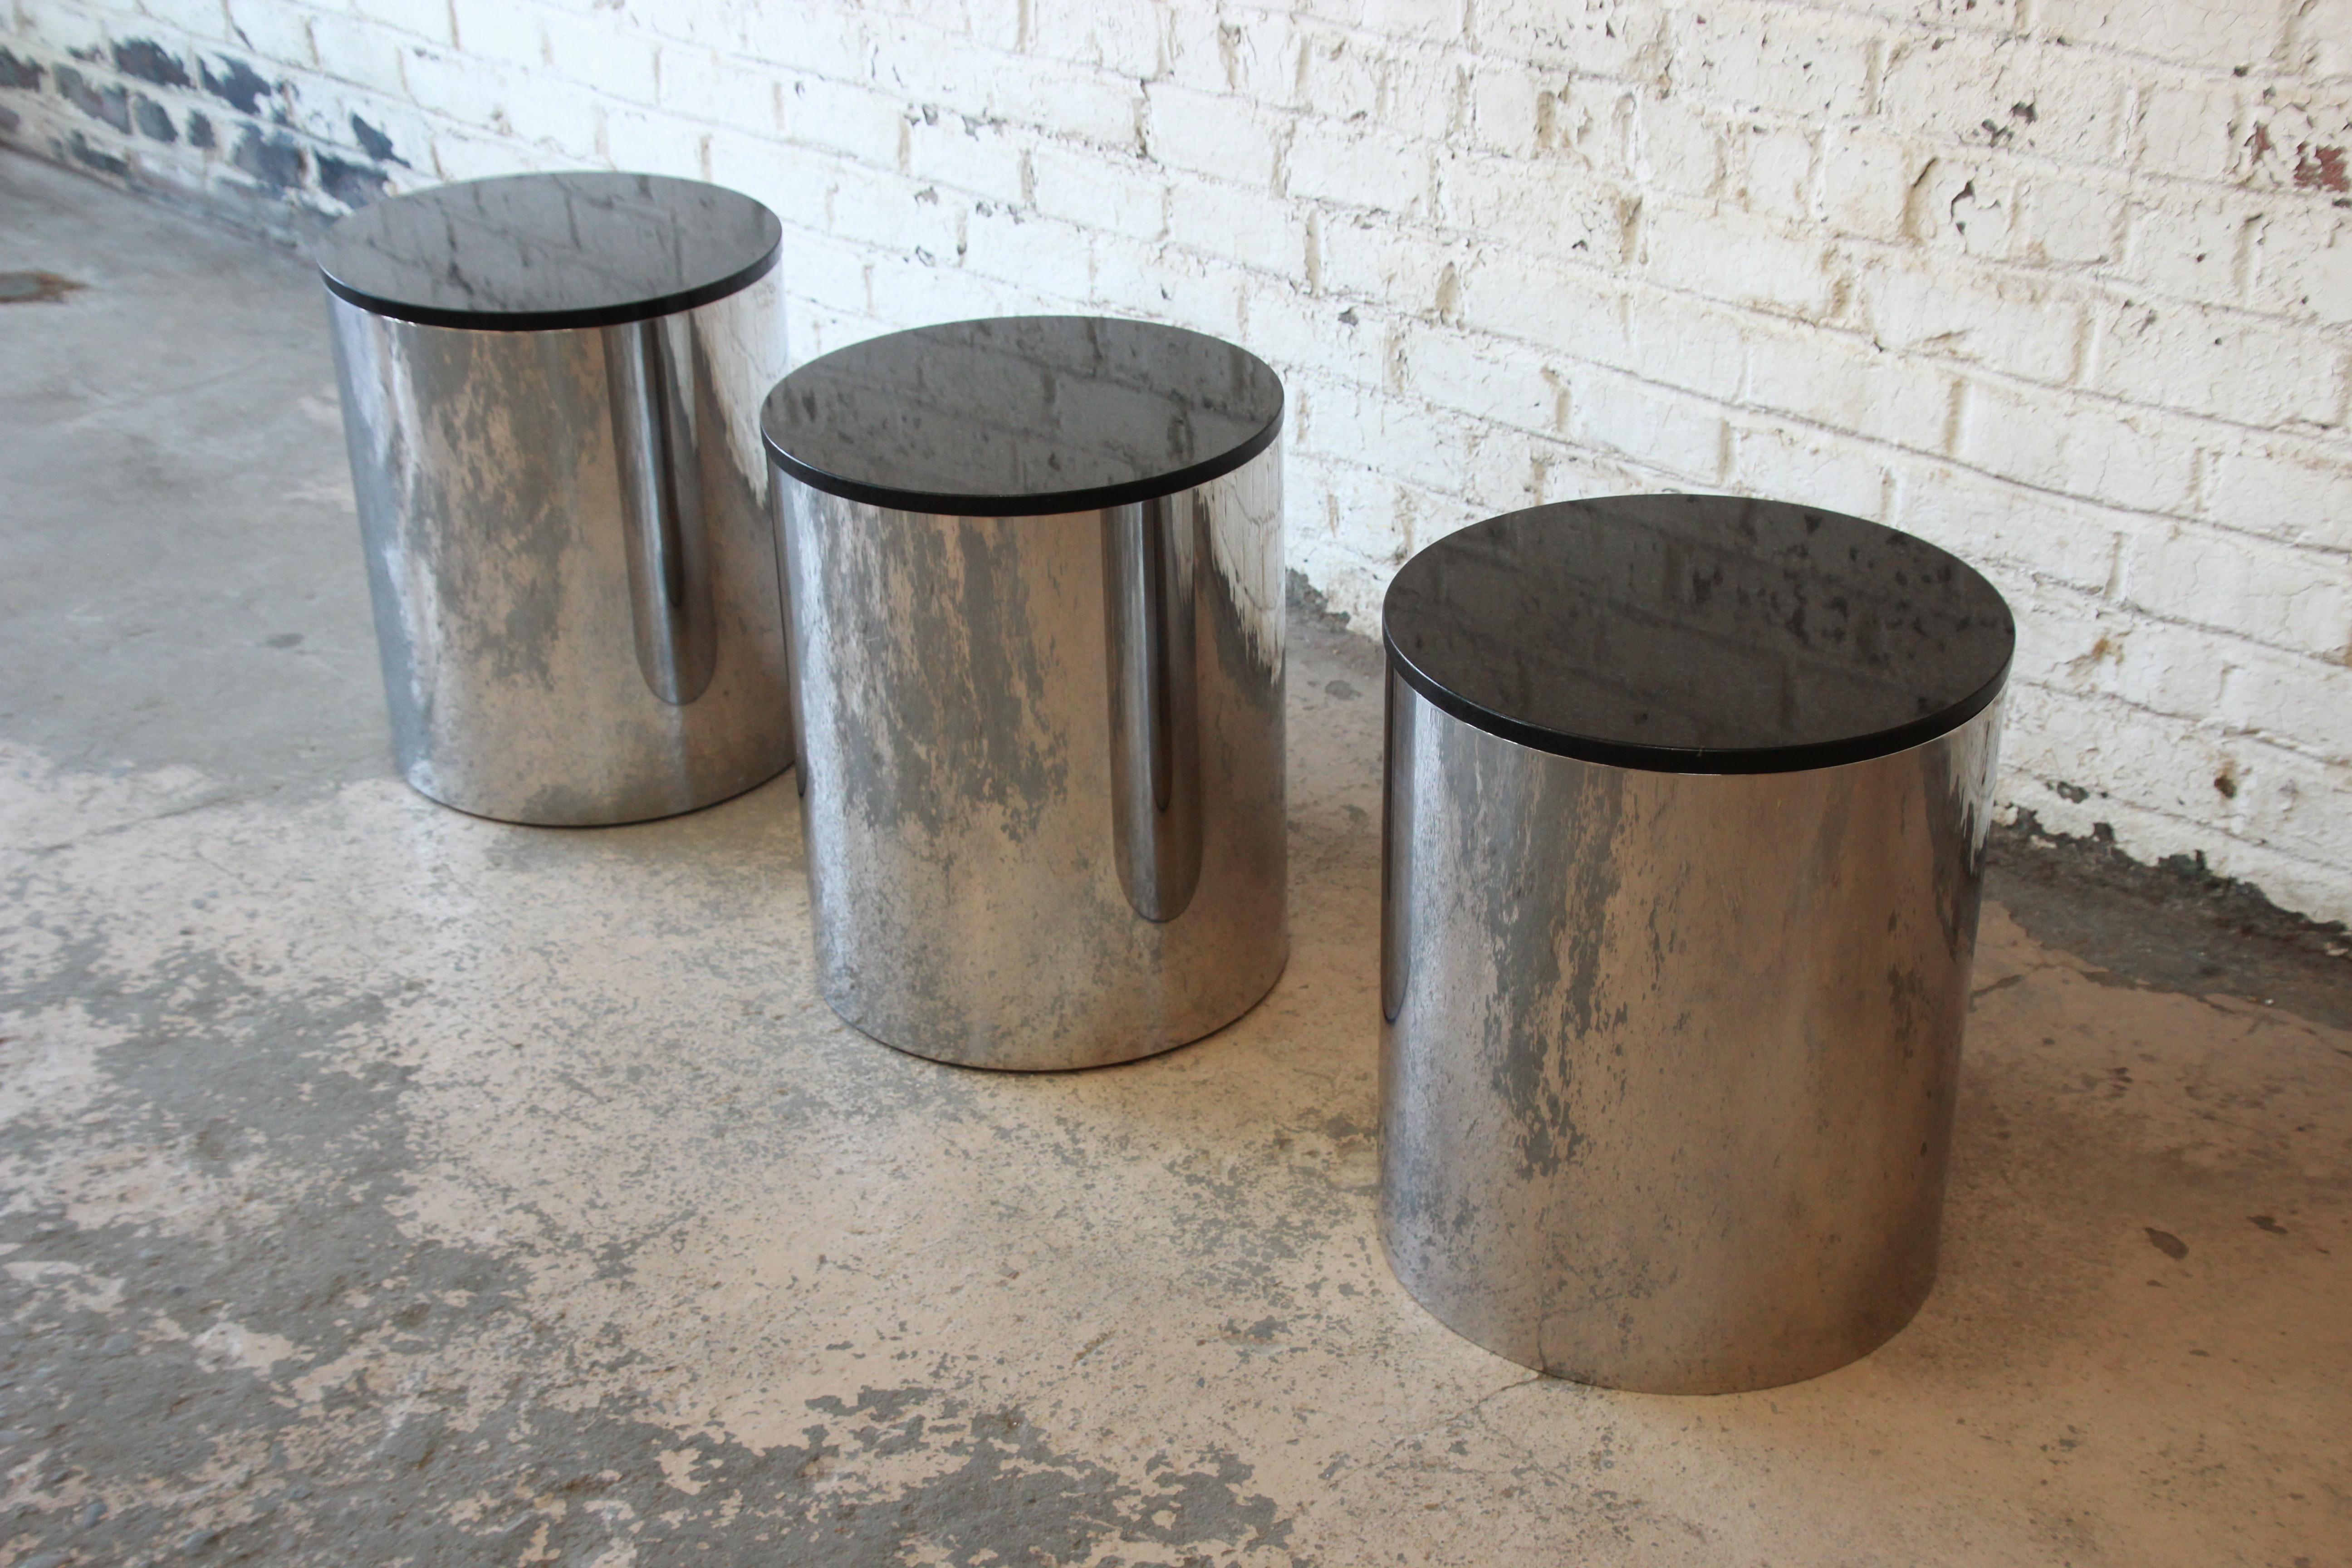 A nice set of three Mid-Century Modern polished aluminum and black granite top drum side tables or plant stands by Paul Mayen for Habitat. The tables are in very good original condition, with minimal wear from age and use. A perfect addition to any